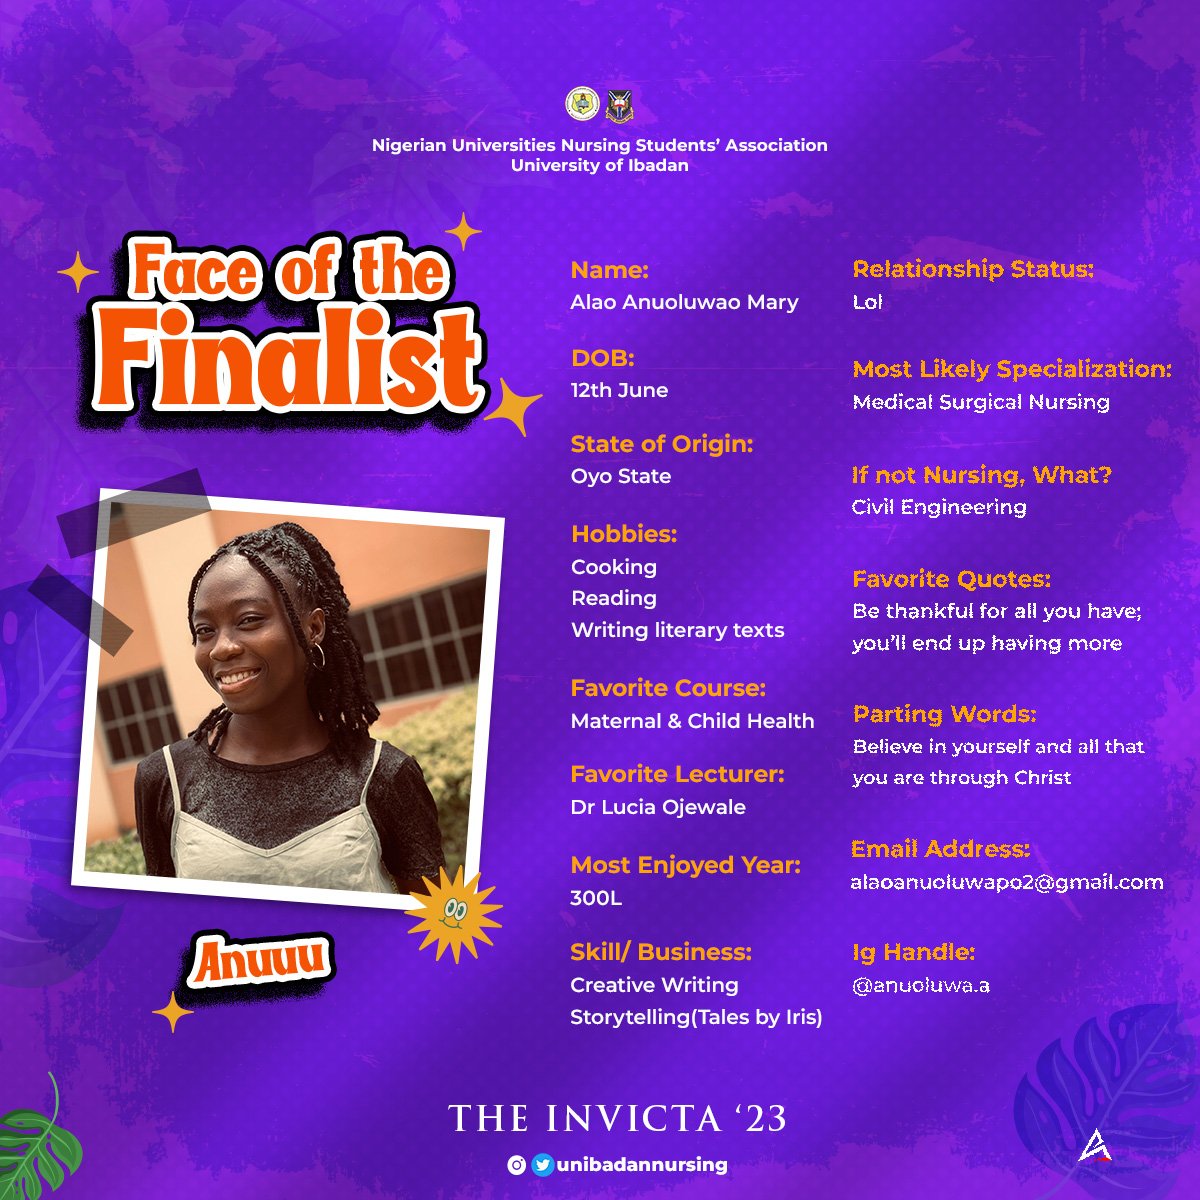 15 & 16/37

Meet Faleye Oluranti and Alao Anuoluwapo , the finalists we are spotlighting today! 🥂✨

They are the faces of the finalists for The Class Invicta 23' today! 😇🥳

#Finalistoftheday #NUNSAUI #UnibadanNursing